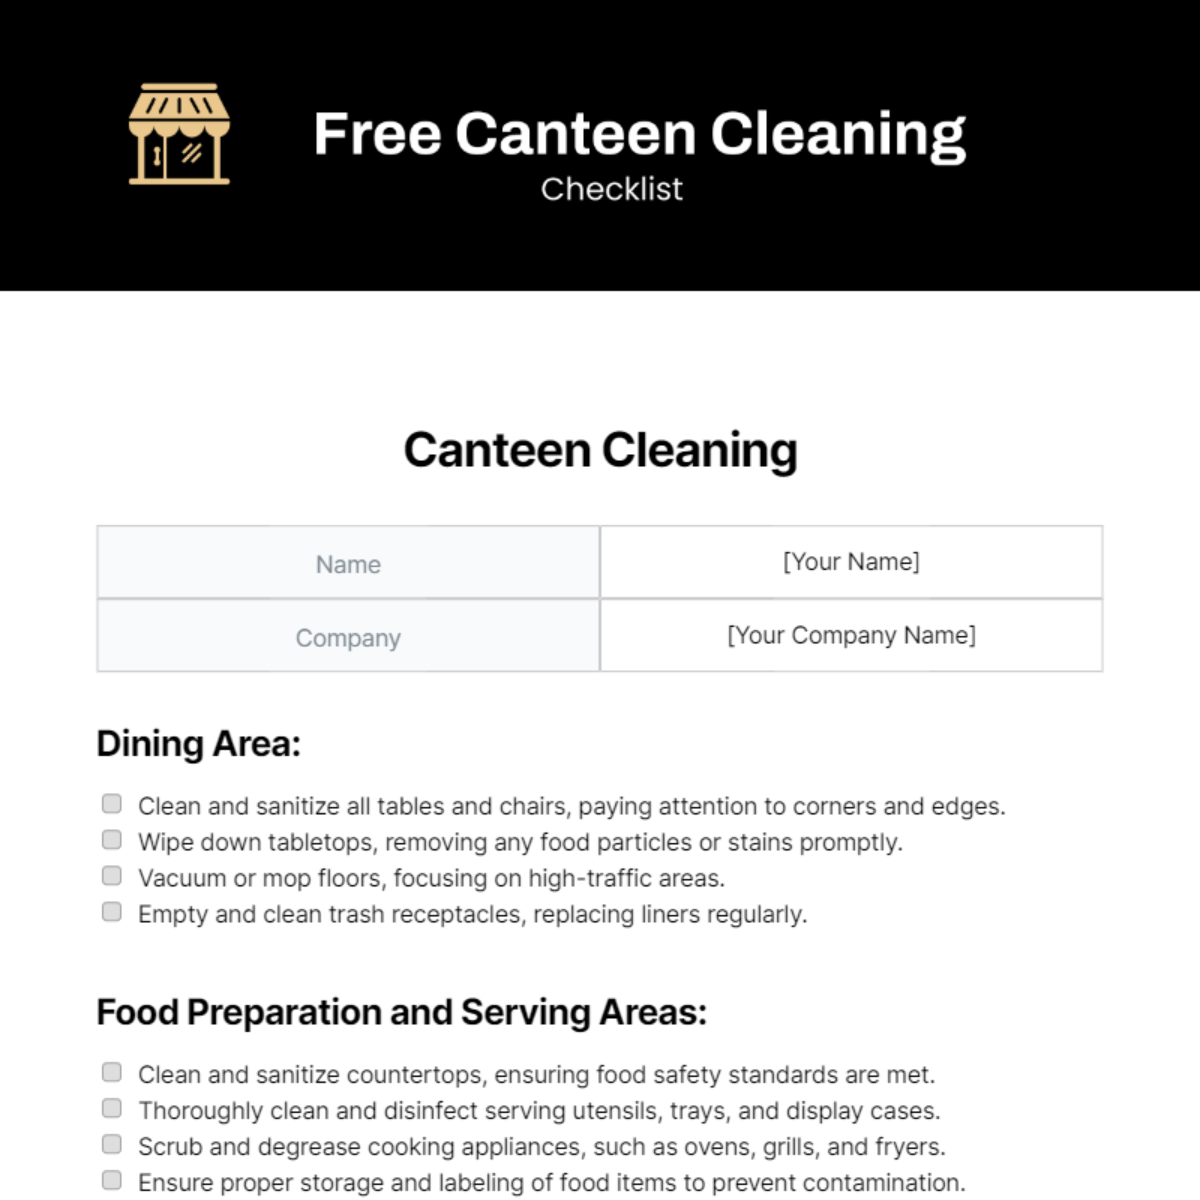 Free Canteen Cleaning Checklist Template 